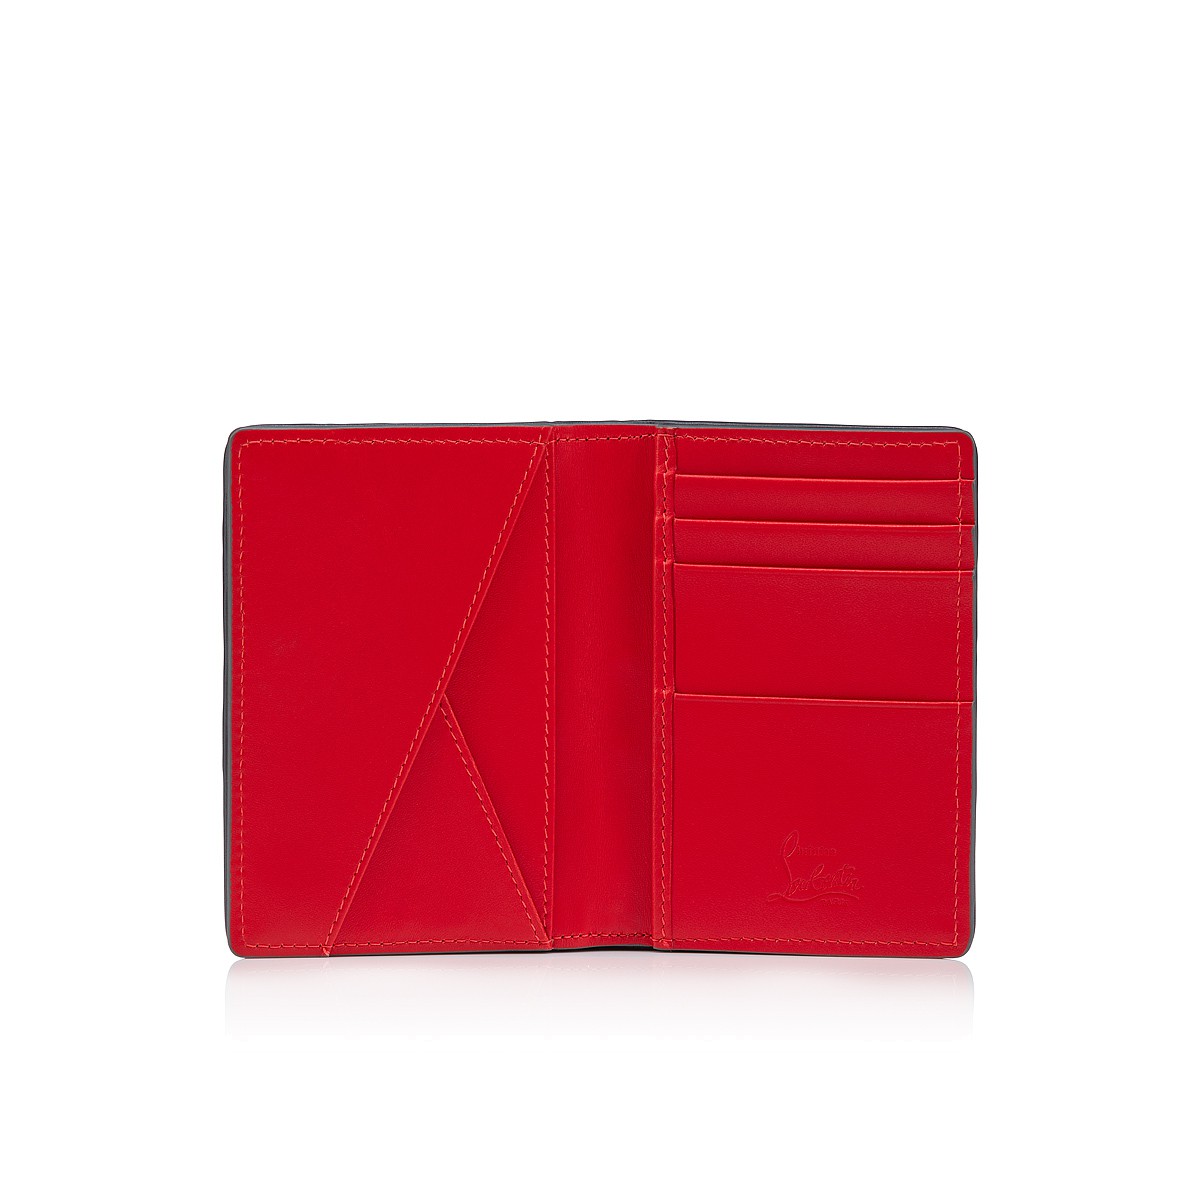 Small Leather Goods - Sifnos - Christian Louboutin